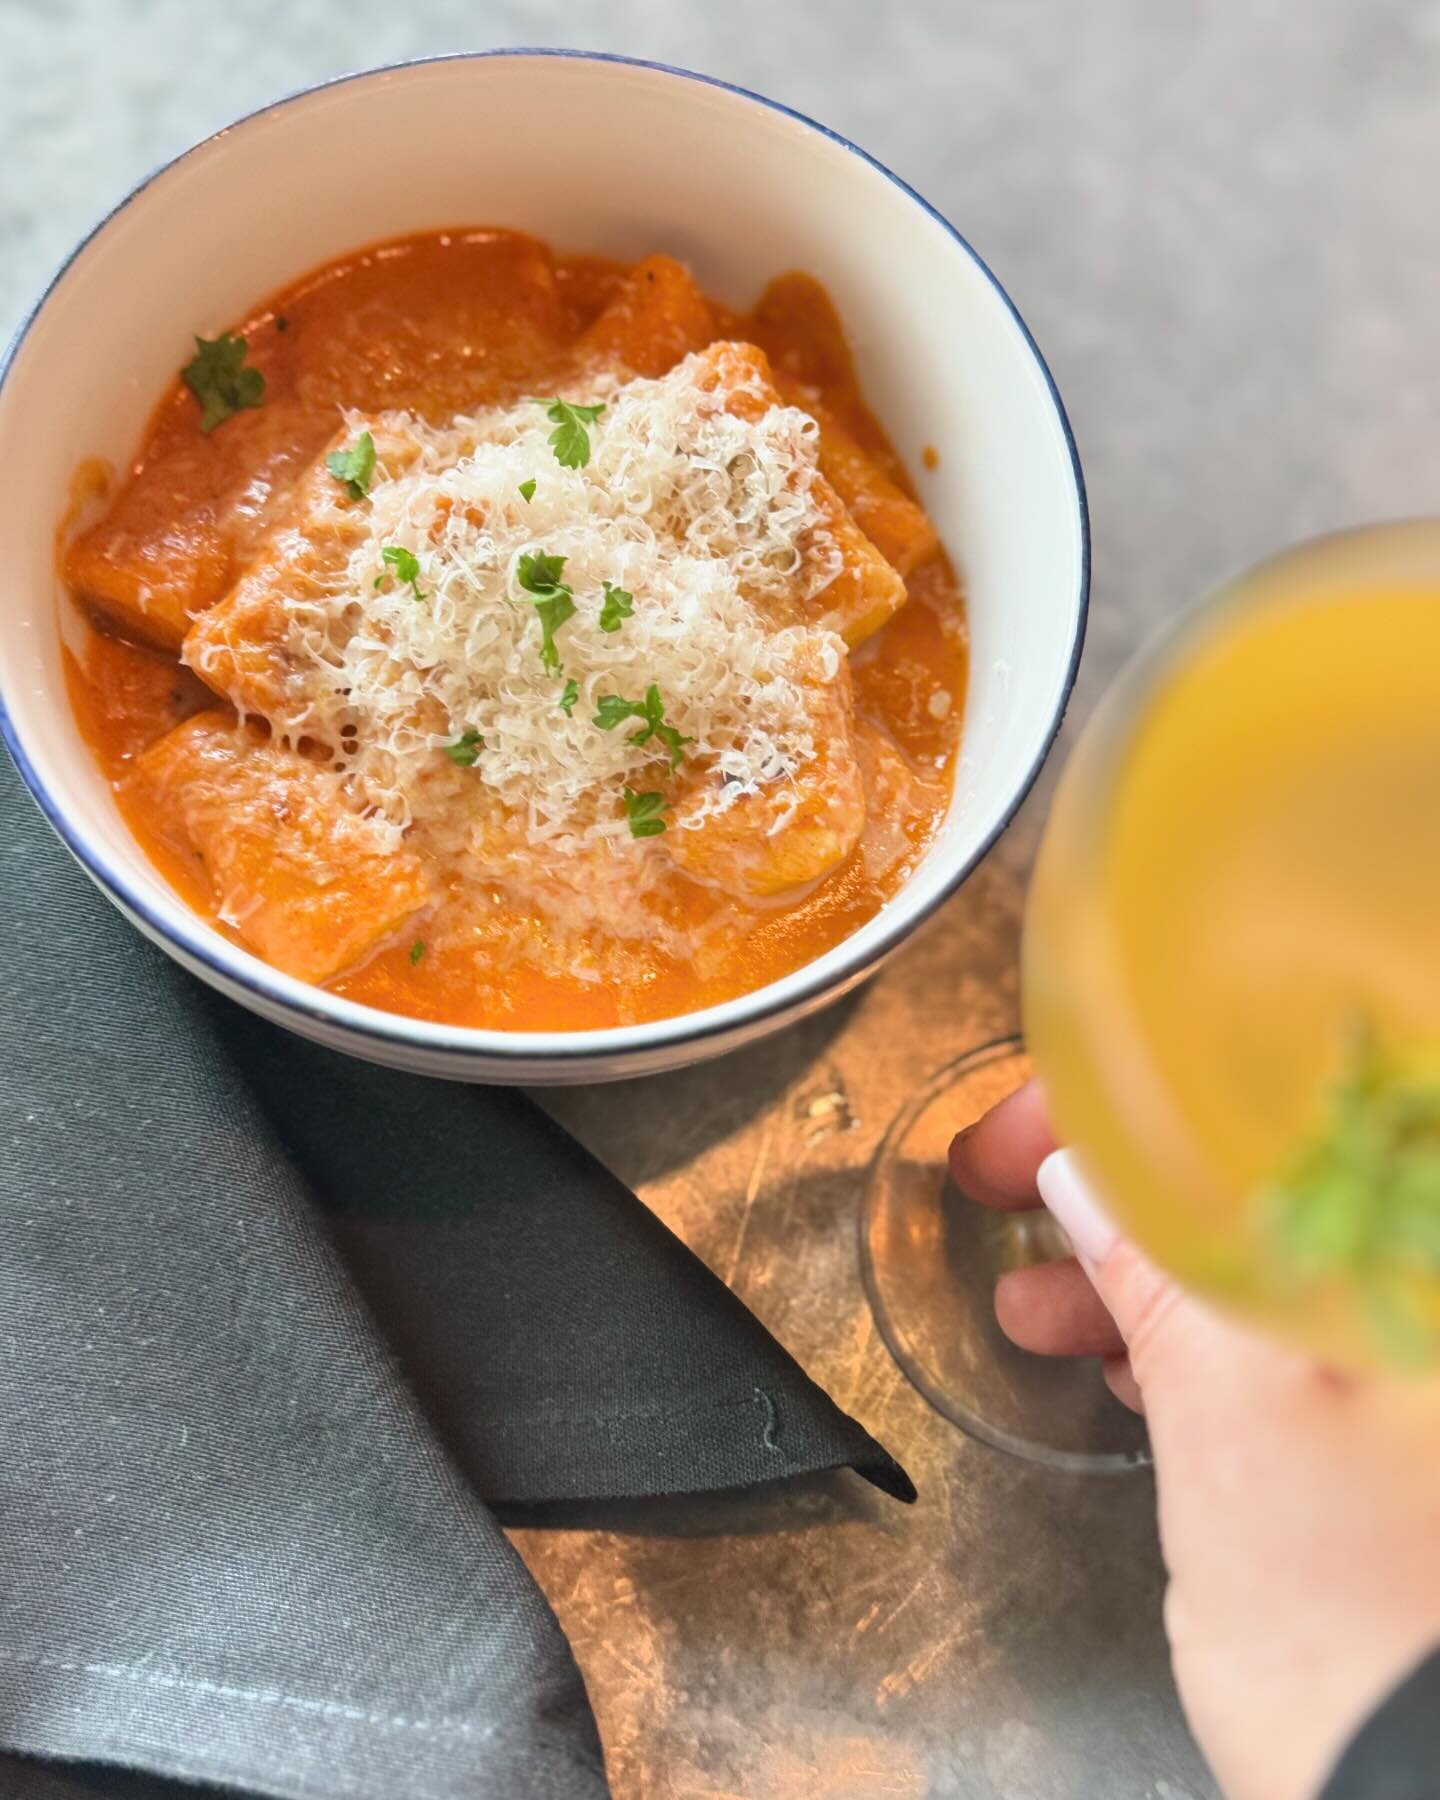 ✨Take comfort✨

Busy week that rolled right into a wild weekend?  On a SX hangover (either literal or figurative)? A delicious reprieve awaits with a comforting bowl of our Toasted Gnocchi with berebere-spiced walnut romesco sauce under a satisfying 